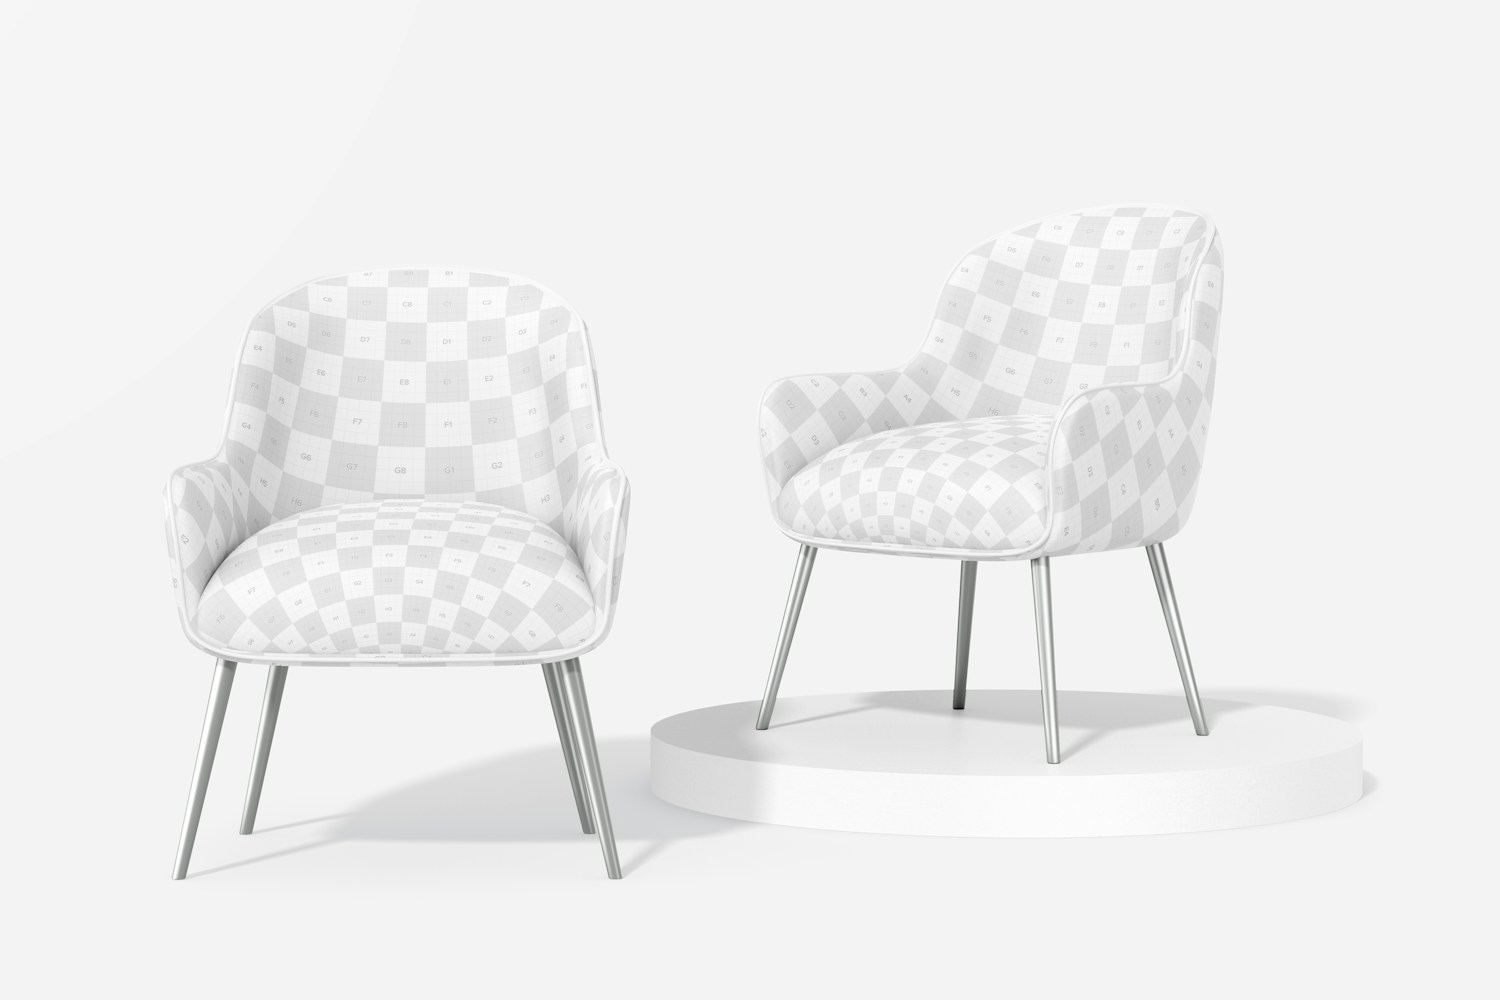 Modern Chairs Mockup, Right View